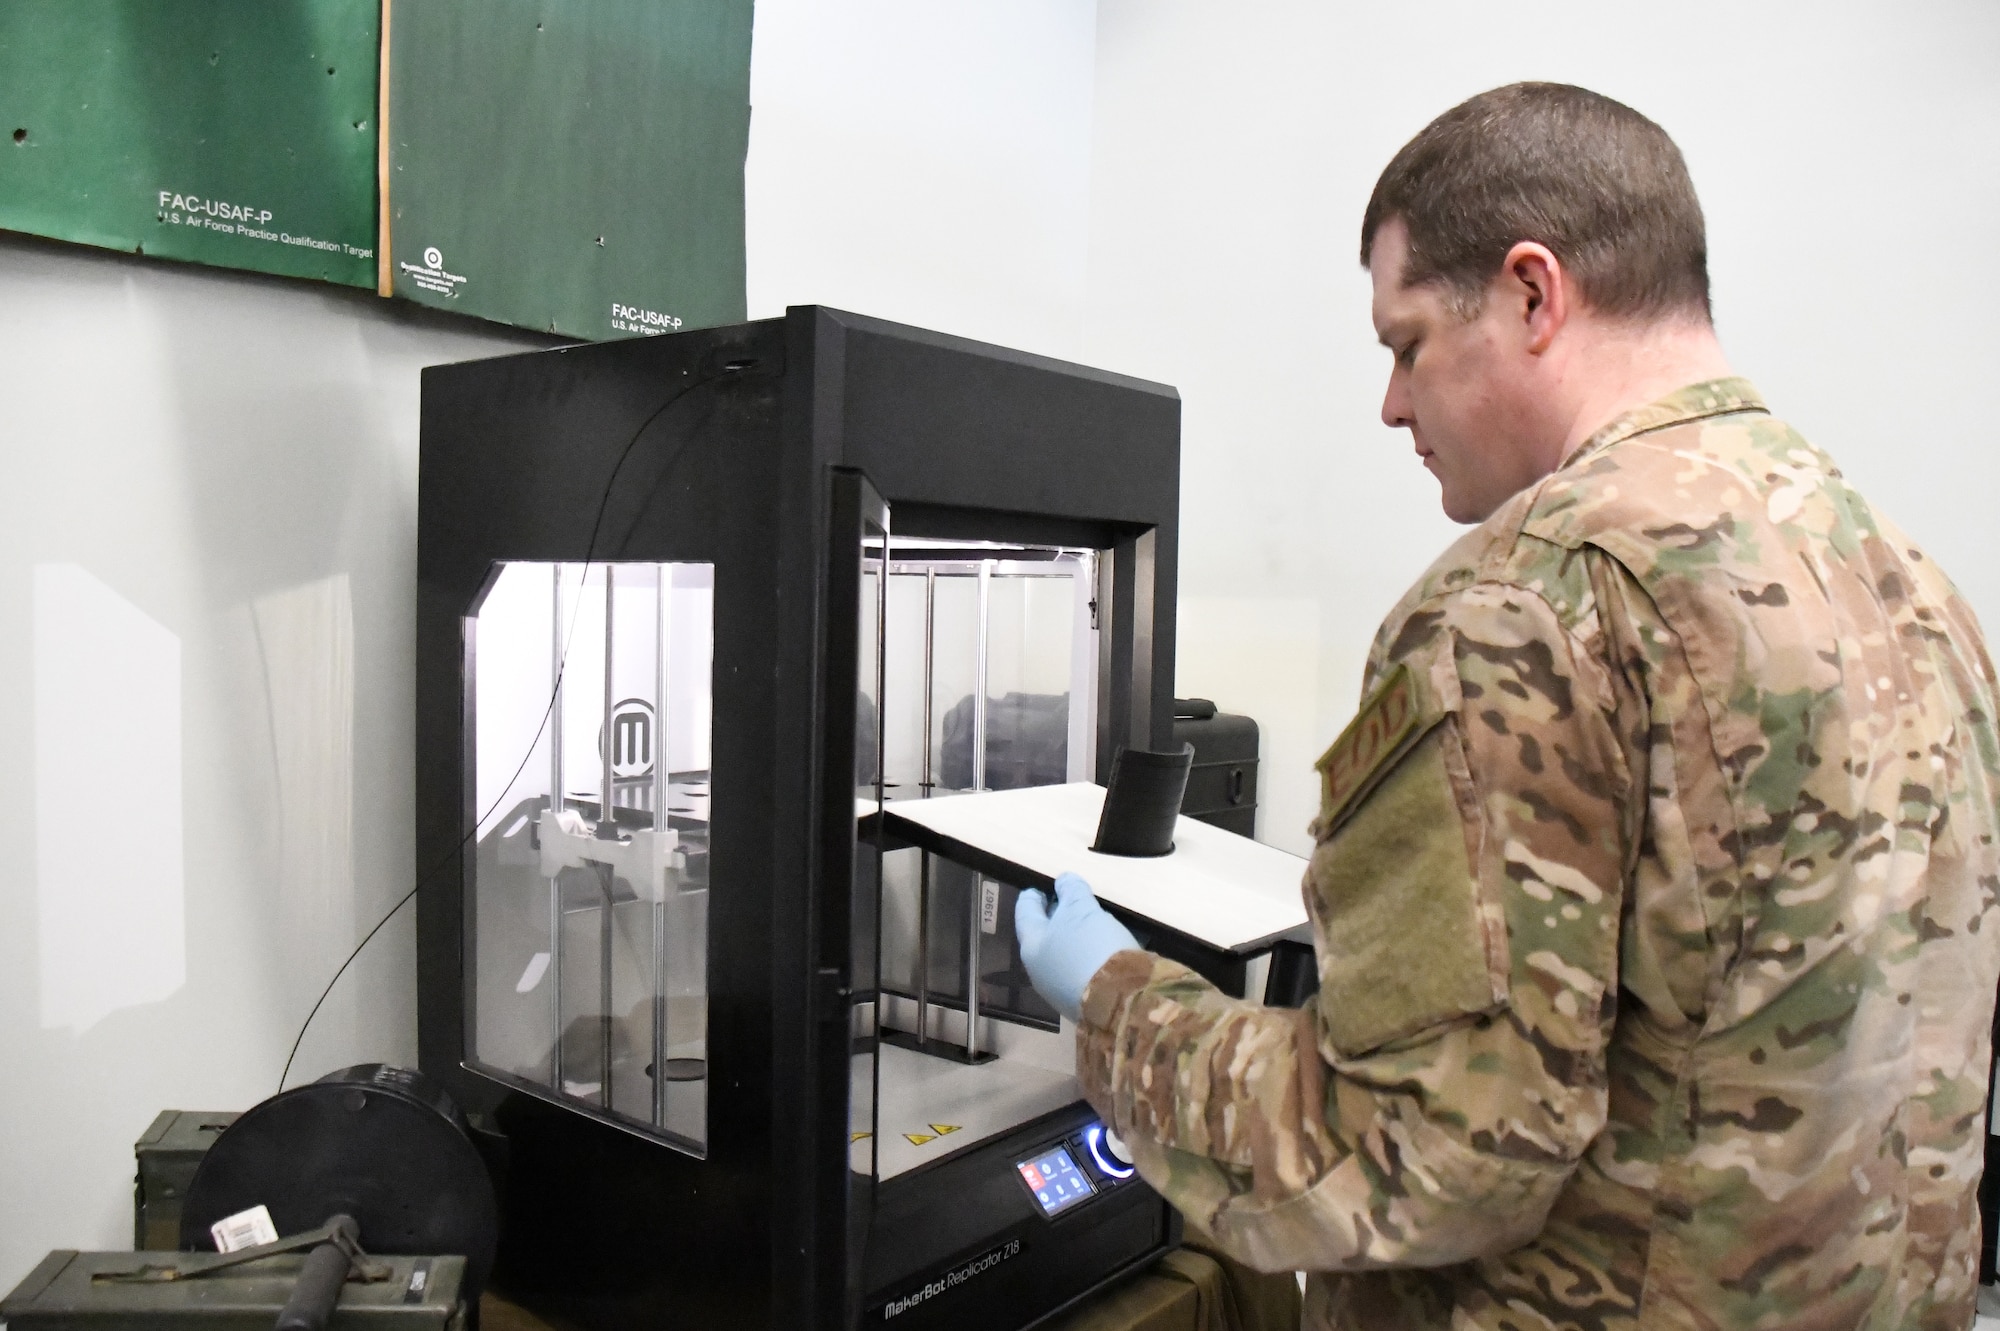 Senior Master Sgt. Jeremiah Mcclosky, Explosive Ordnance Disposal Superintendent, 104th Fighter Wing, prints a protective mask from a 3D printer for the 104th Fighter Wing Medical Group. The 104th Fighter Wing Medical Group is responding to state COVID-19 response efforts throughout the state of Massachusetts. (U.S. Air National Guard photo by Airman 1st Class Sara Kolinski)